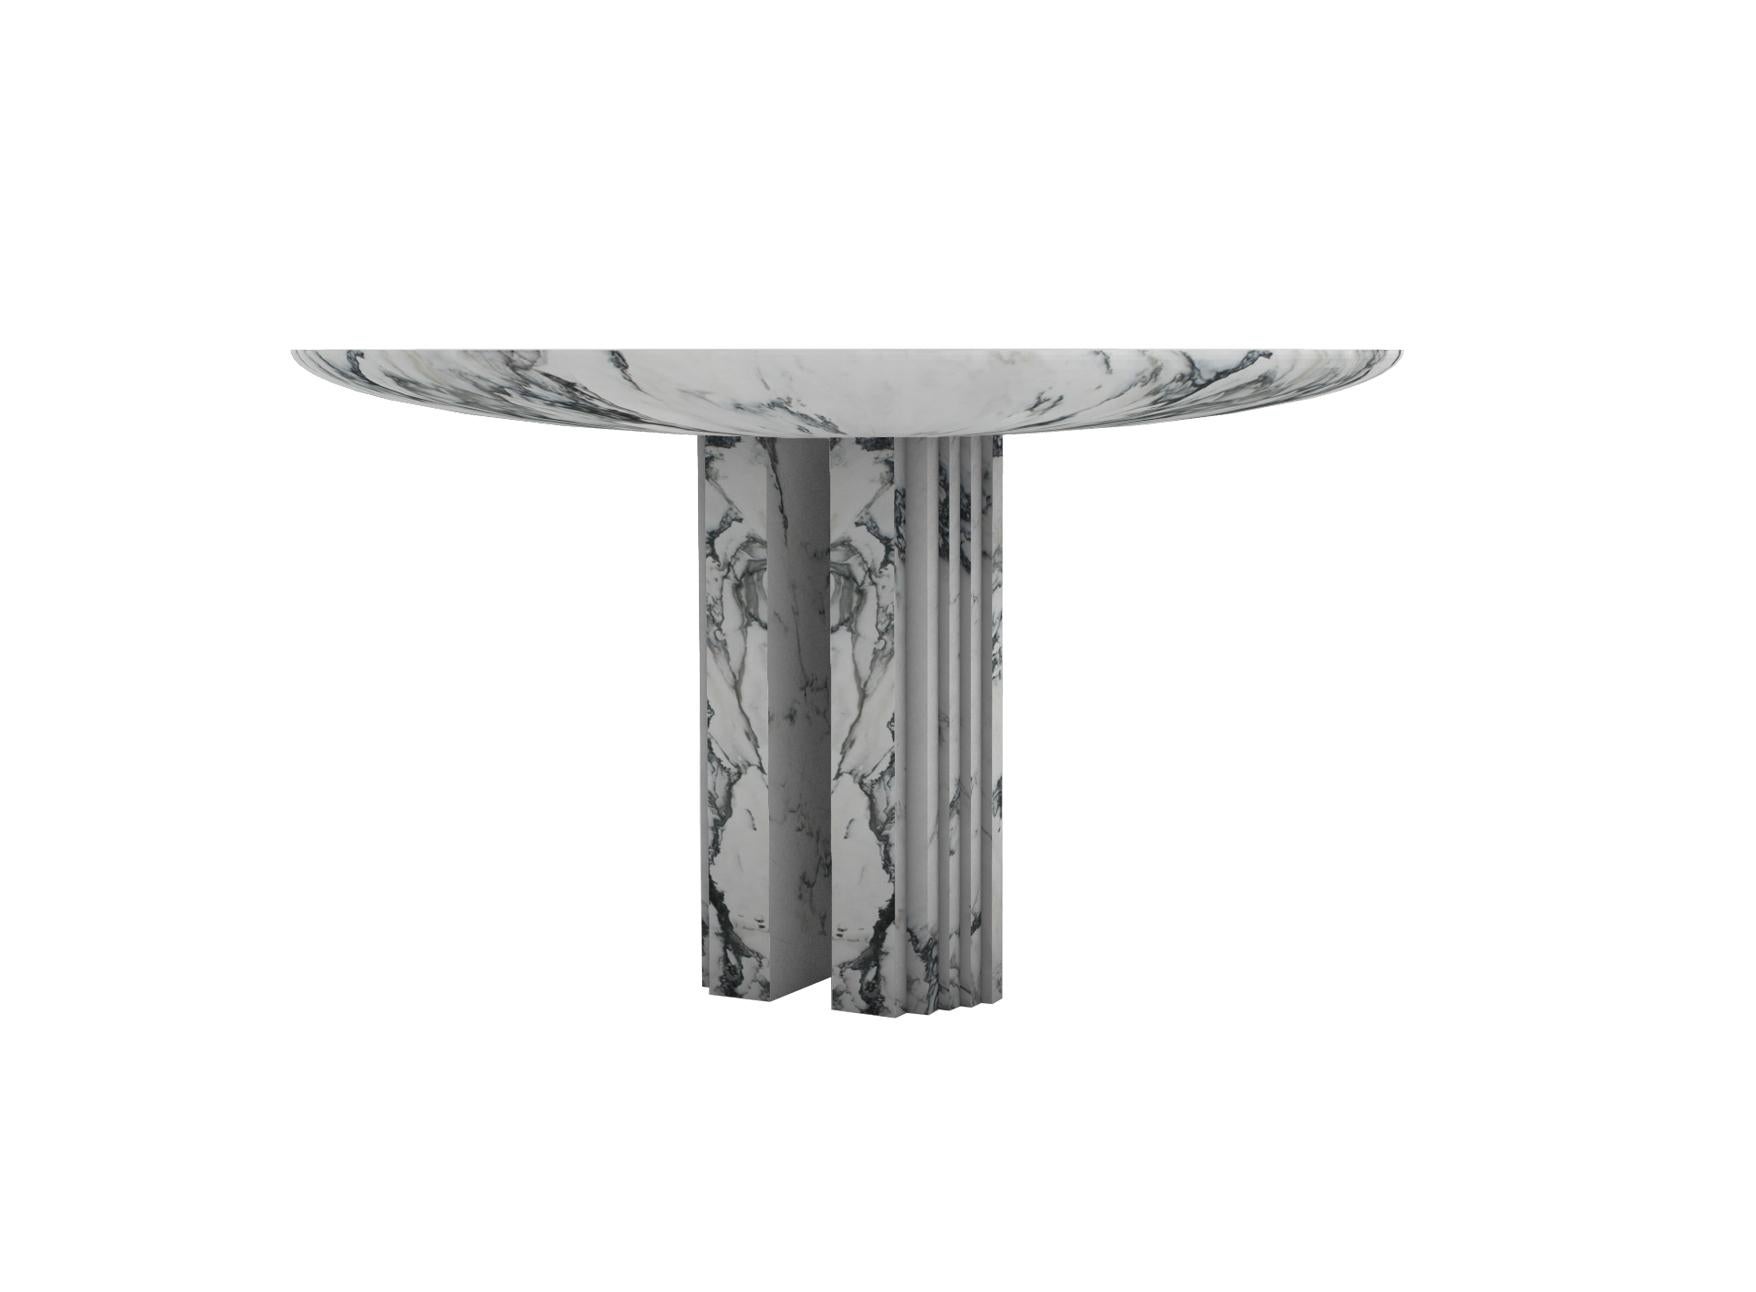 “Dining table 0024c” is a sculptural table in Paonazzo Marble created by the artist Desia Ava. 
The piece features strong lines and gentle curves. Marked by architectural aesthetics, on the borderline between sculpture and furniture the Marble block